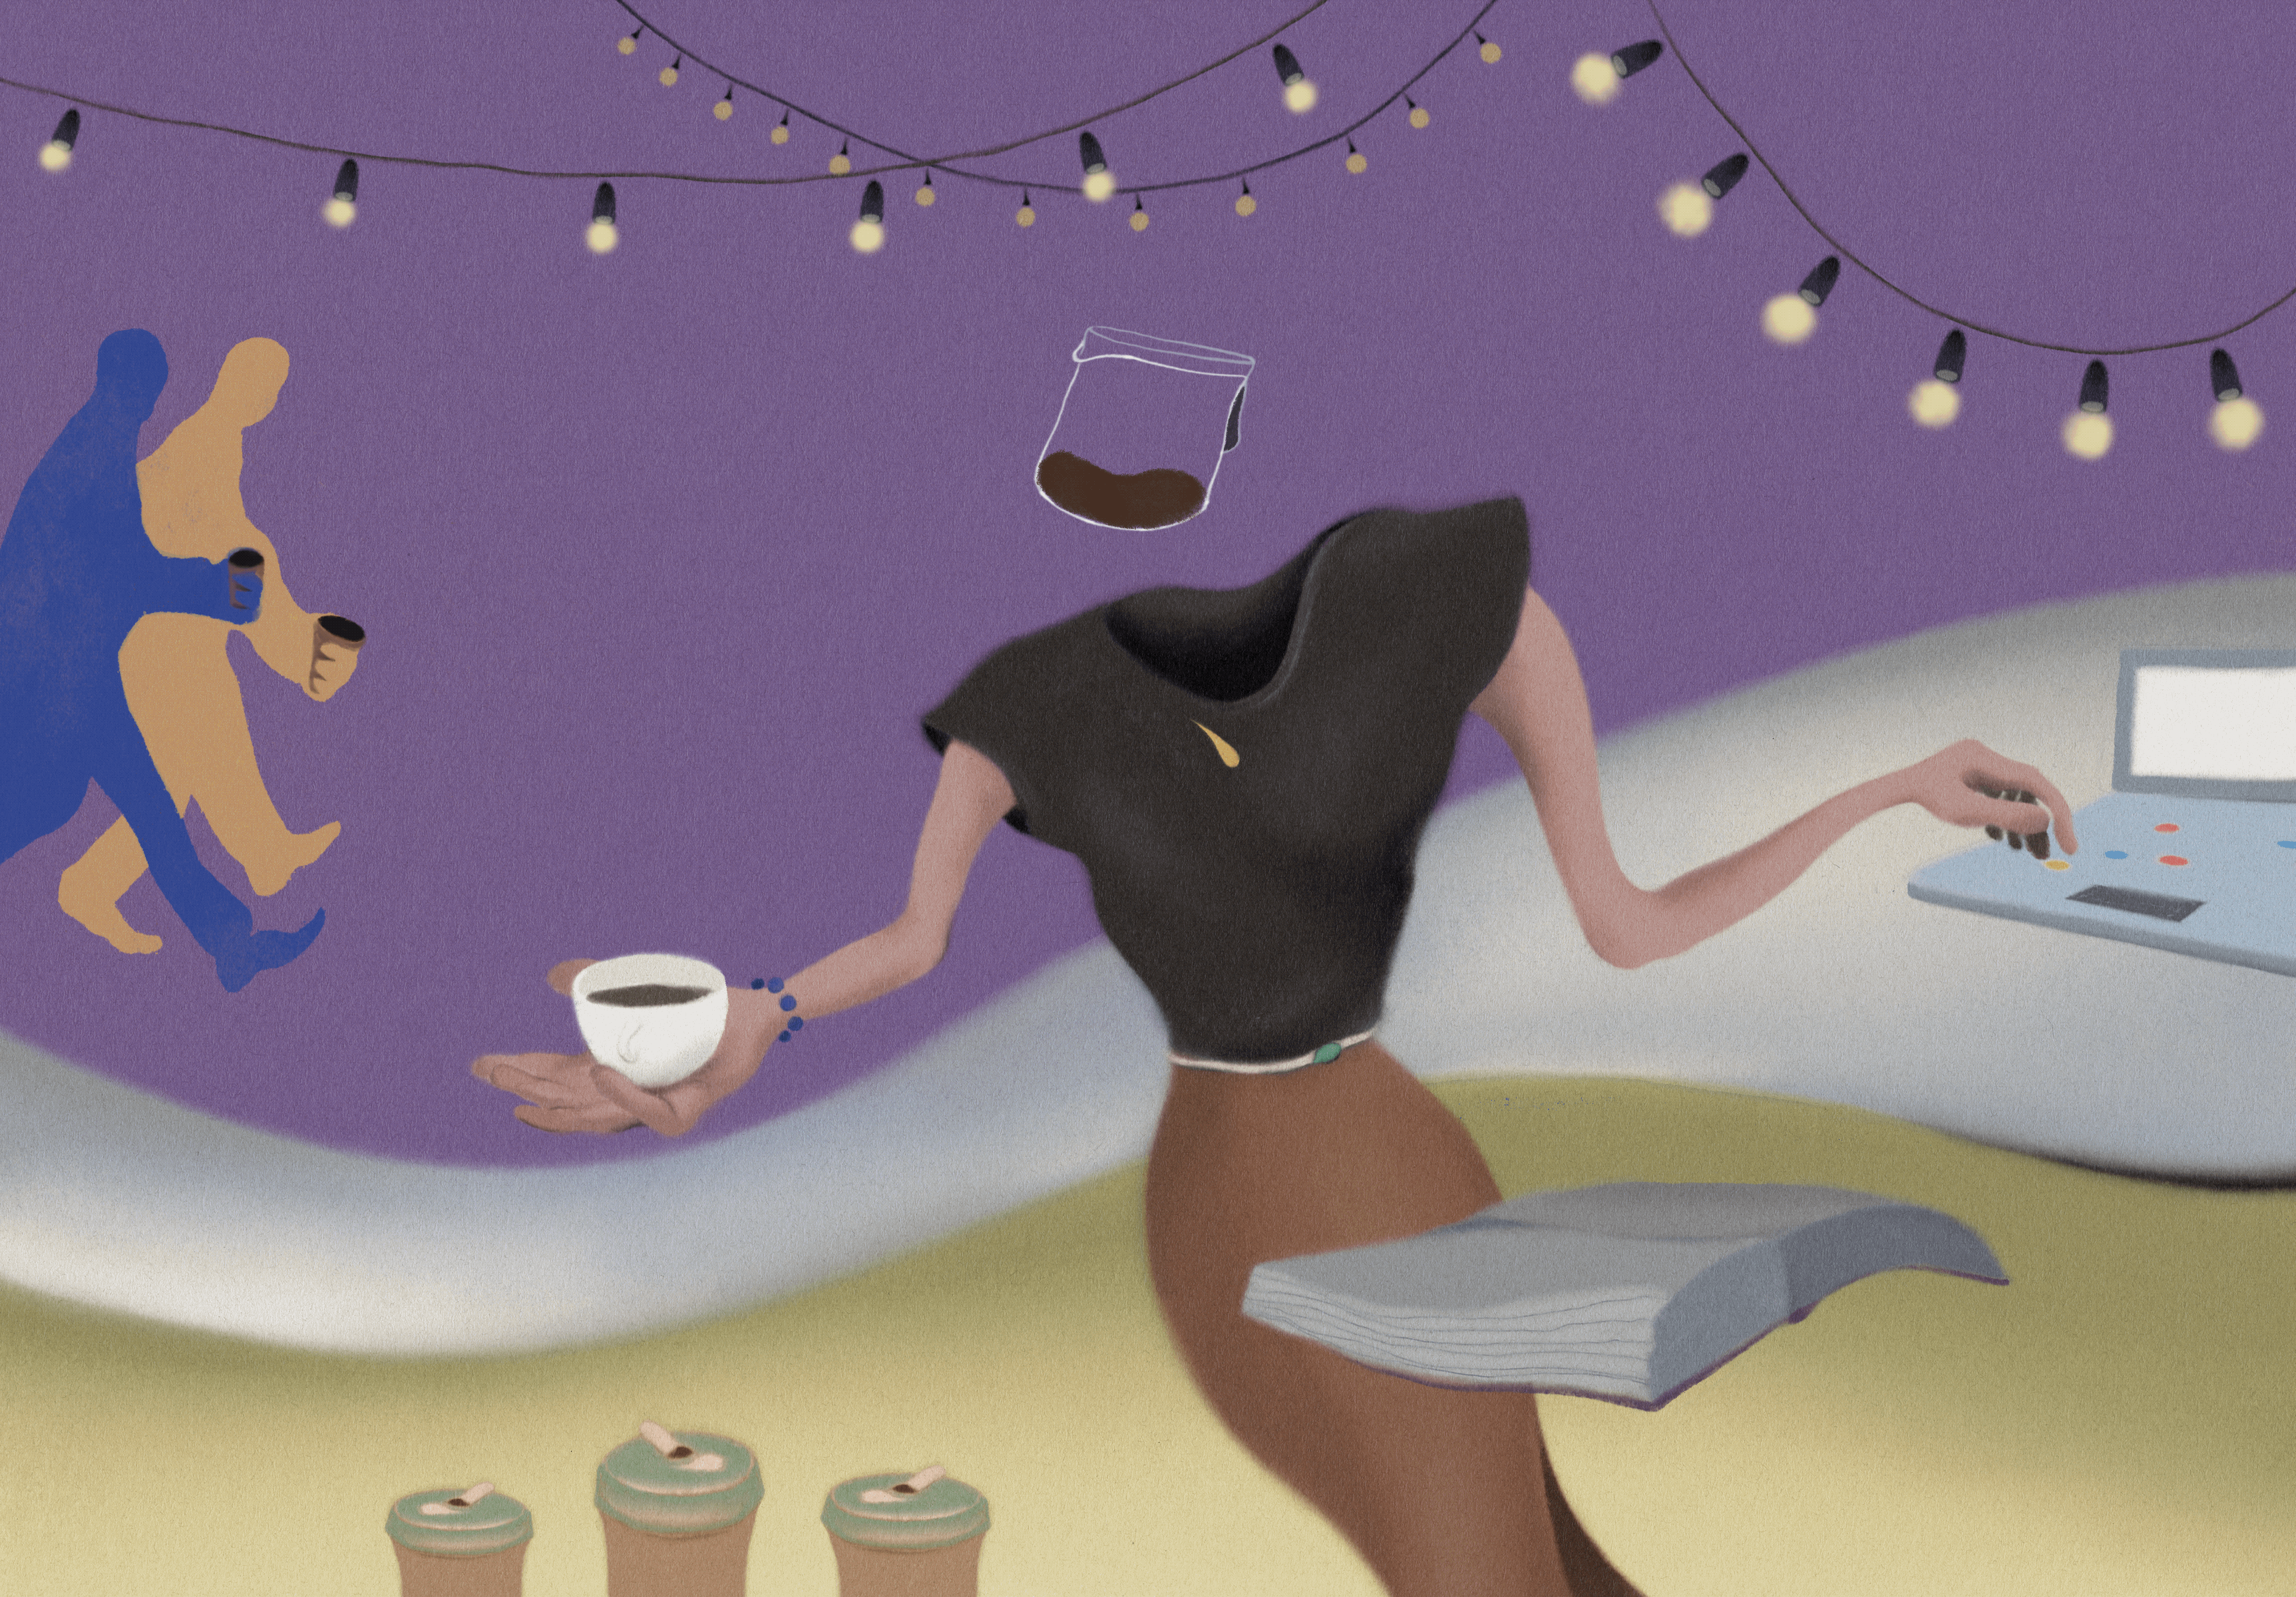 illustrated gif of person with swirling coffee pot as head, cup of coffee and saucer in one hand, the other hand typing on a laptop. Strings of lights appear above, and in background, silhouettes carrying cups of coffee flash.